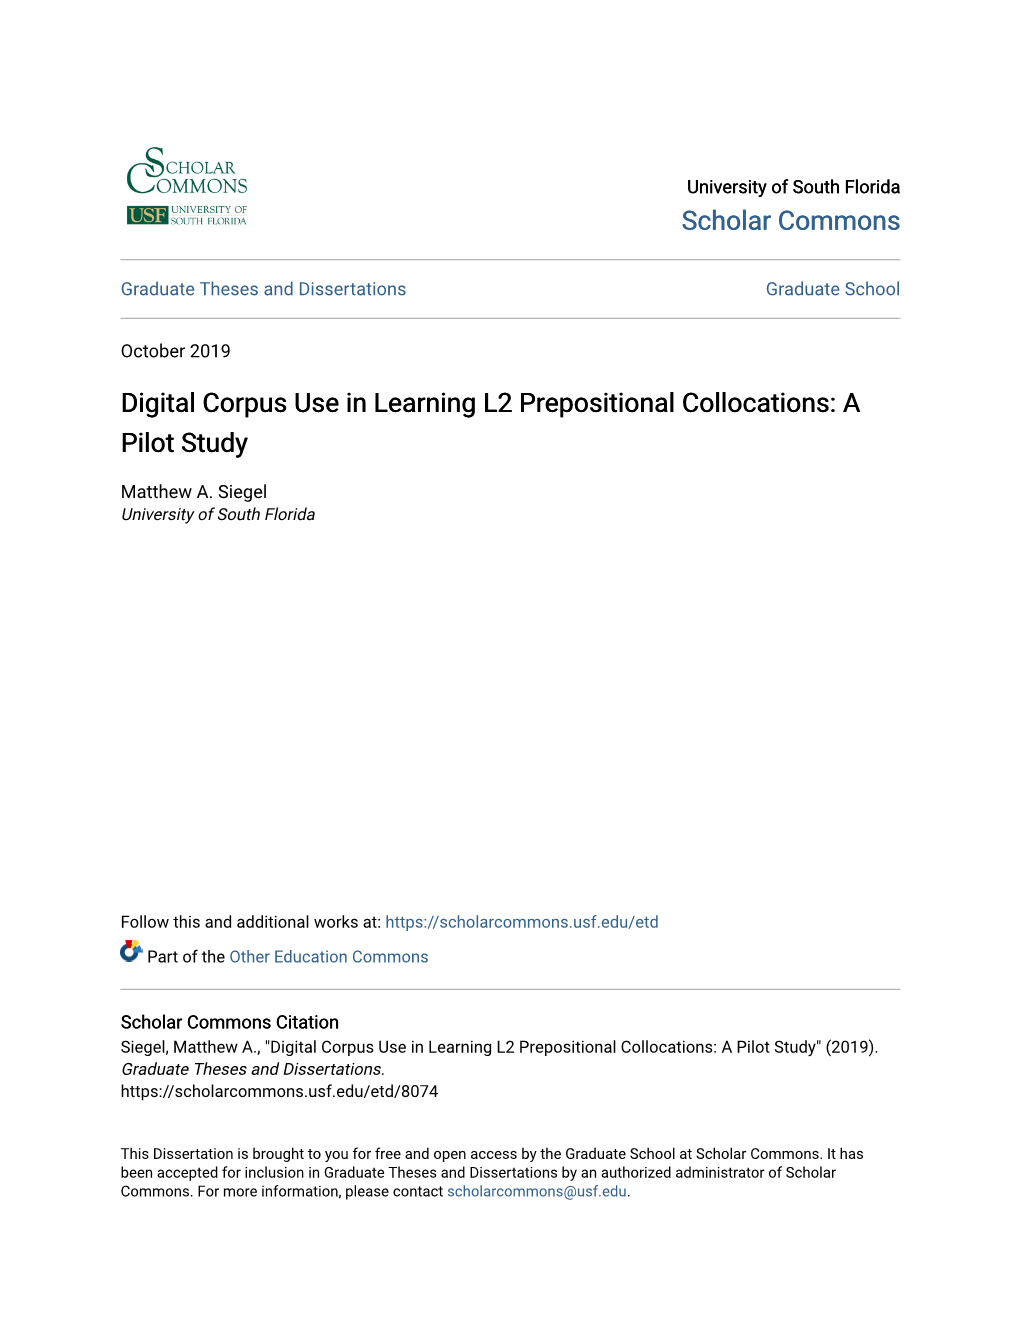 Digital Corpus Use in Learning L2 Prepositional Collocations: a Pilot Study